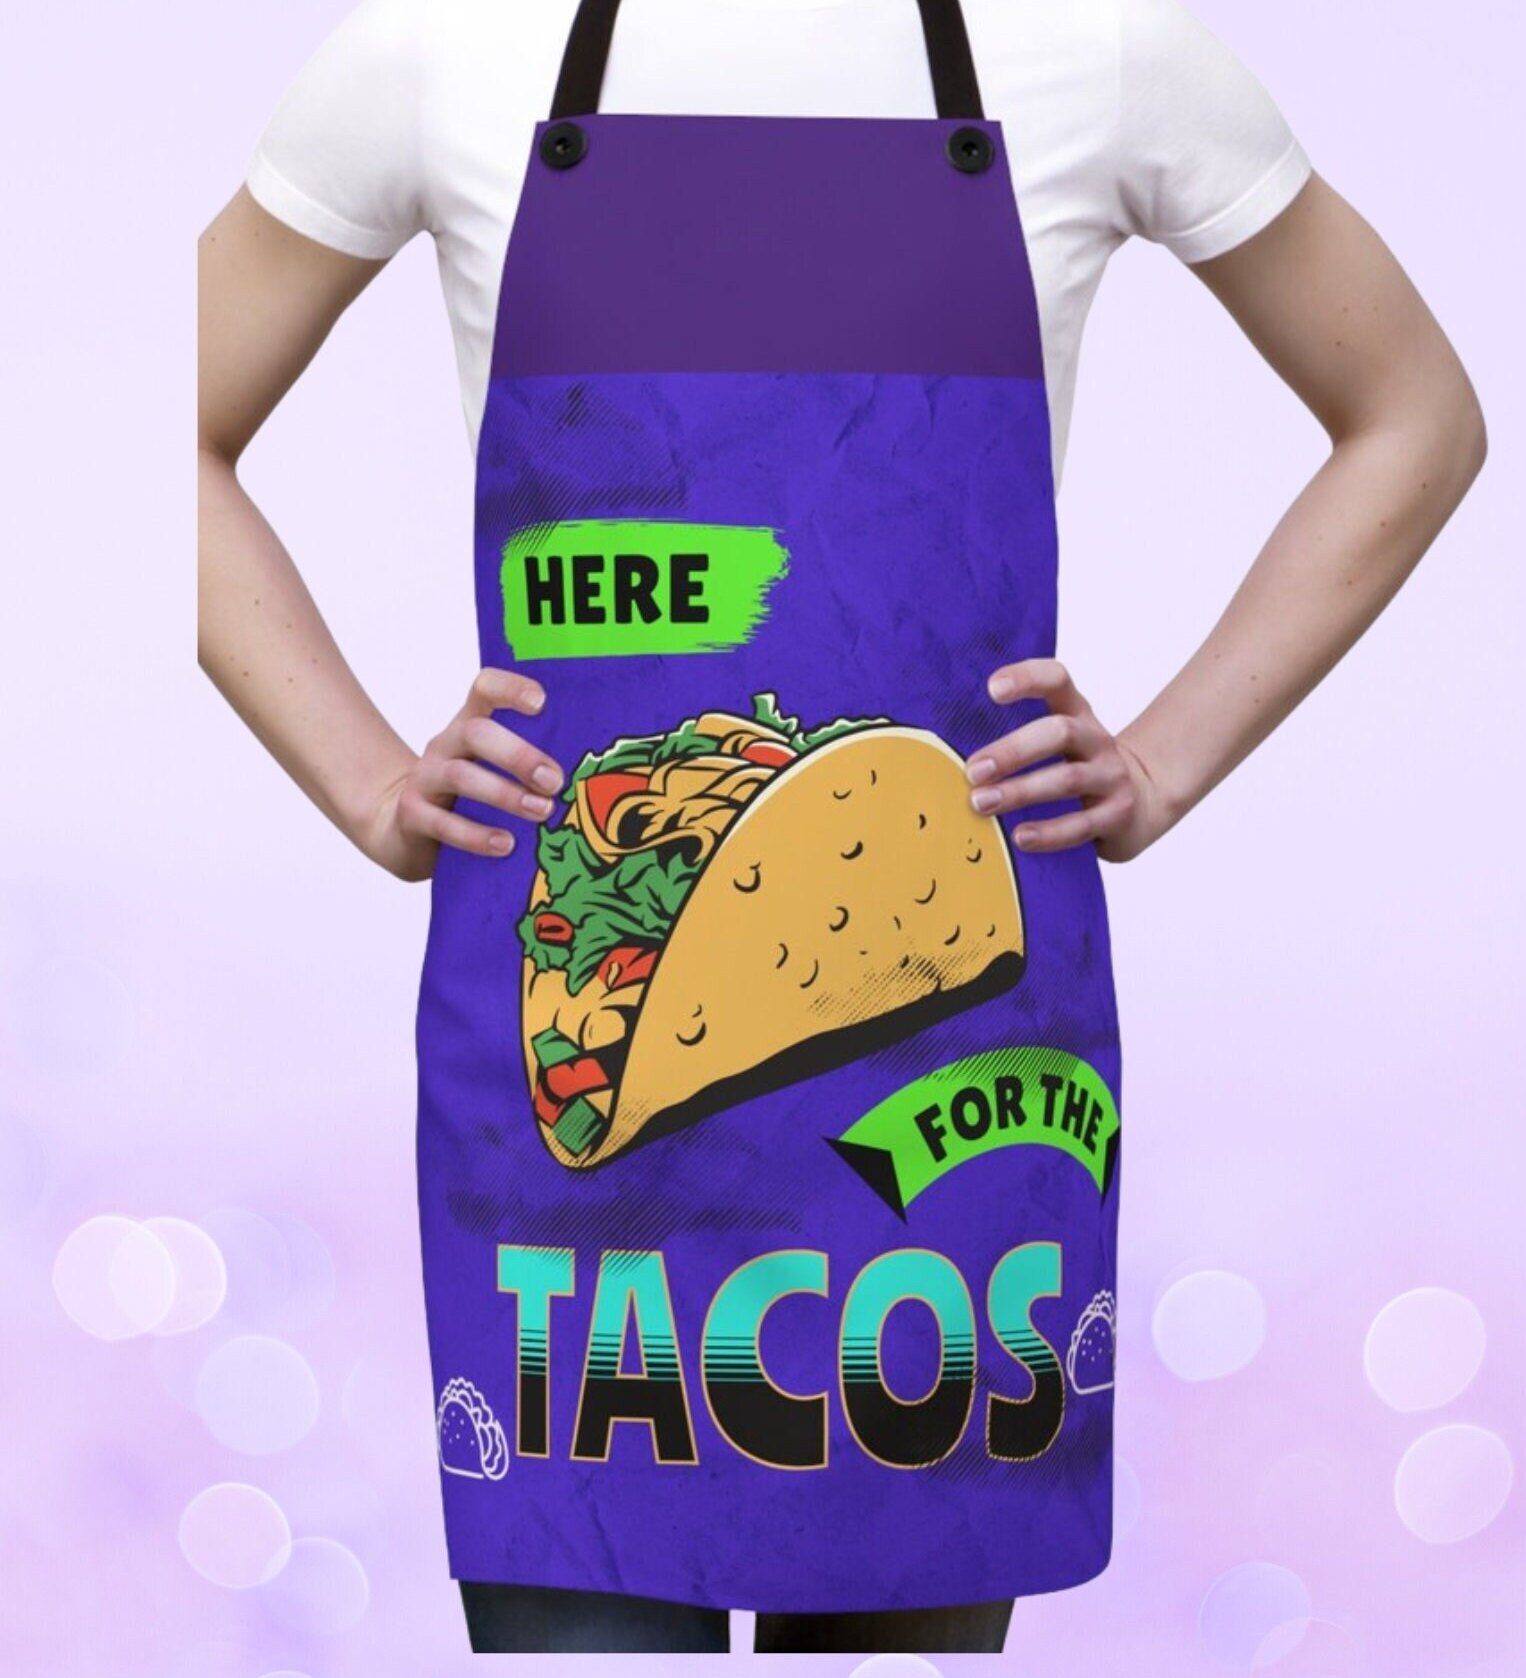 Fitness Taco Funny Kitchen Apron and Oven Mitts Humorous Gym Graphic  Novelty Cooking Accessories (Oven Mitt + Apron) 